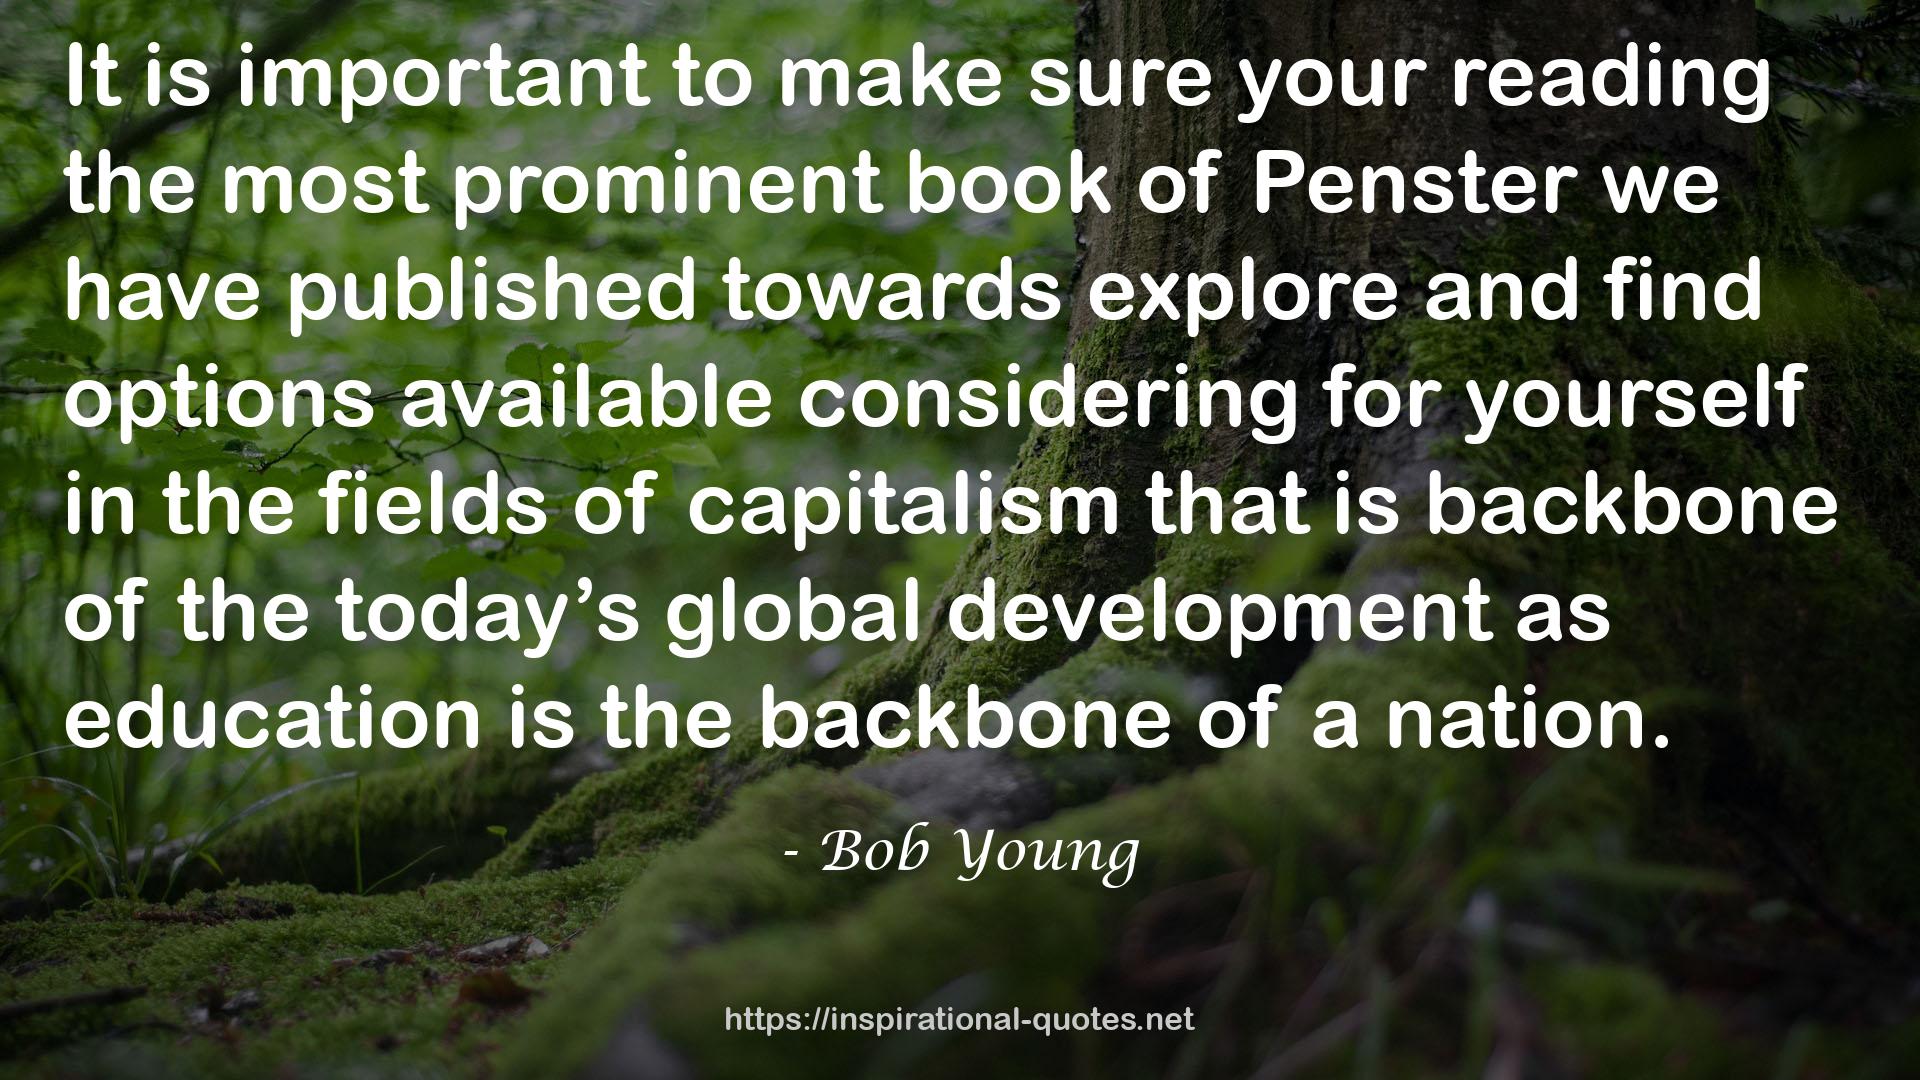 Bob Young QUOTES